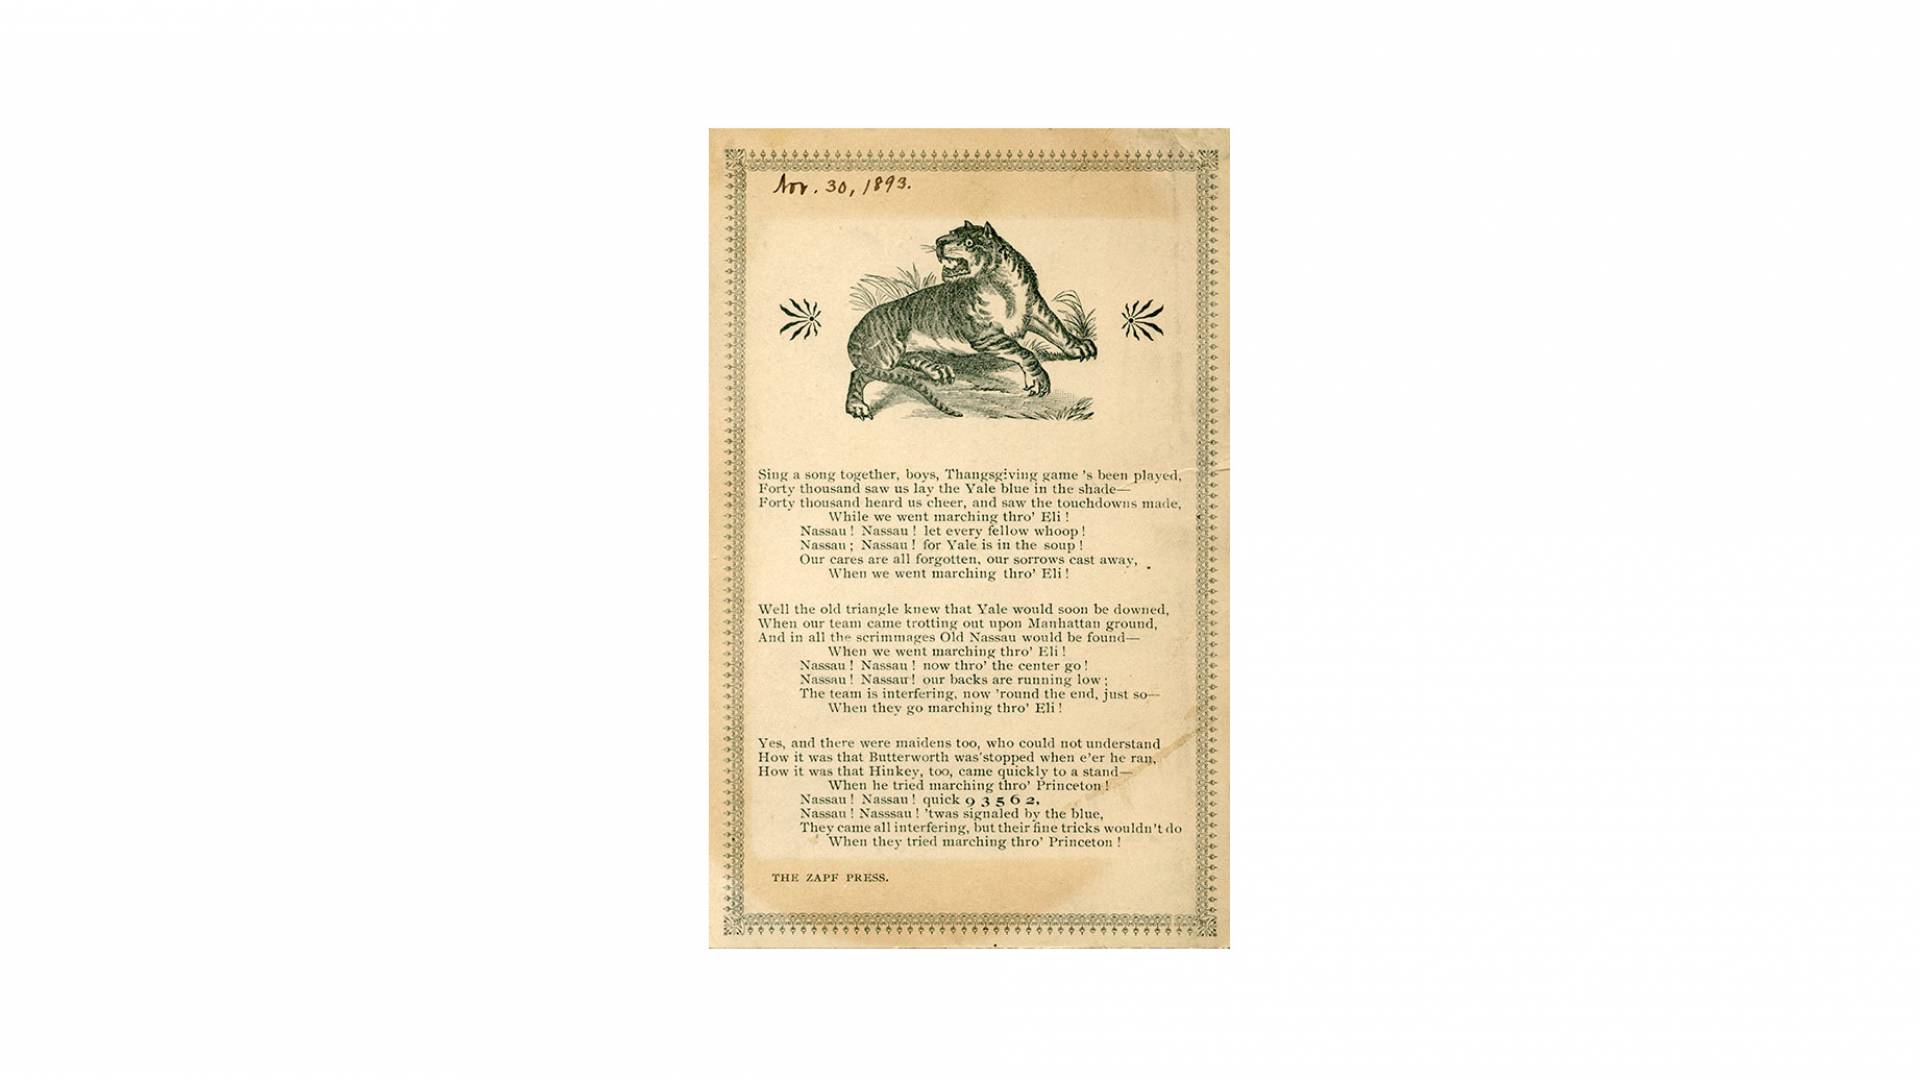 archival printed page of poem: "Sing a song together, boys, Thanksgiving game's been played,/ Forty tousand saw us lay the Yale blue in the shade—/Forty thousand heard us cheer, and saw the touchdowns made,/ While we went marching thro' Eli!/ Nassau! Nassau! now thro' the center go! / Nassau! Nassau! our backs are running low:/ The interfering, now thro' Eli!/Yes, and there were maidens too, who could not understand/How it was that Butterworth was'stopped when e'er he ran,/ How it was that Hinkley, too, ca 